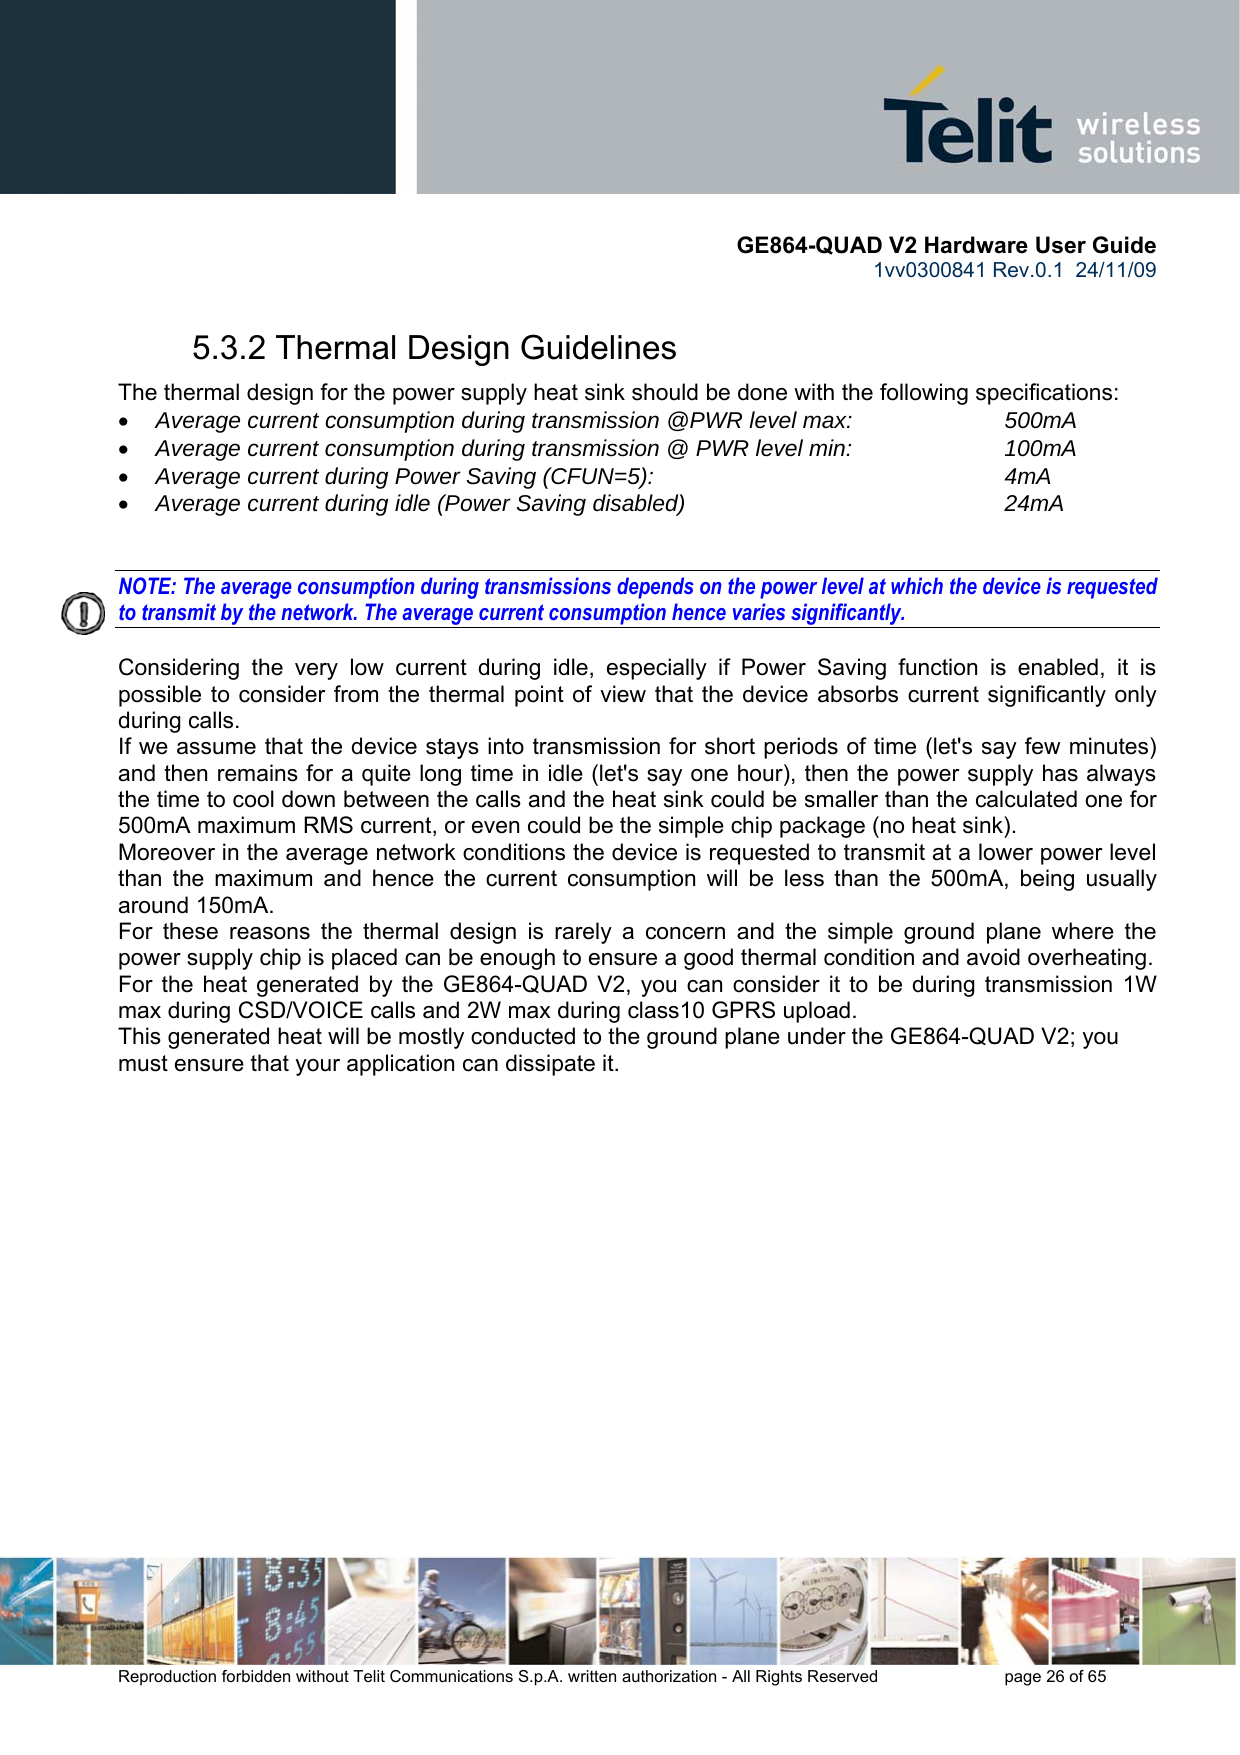       GE864-QUAD V2 Hardware User Guide 1vv0300841 Rev.0.1  24/11/09      Reproduction forbidden without Telit Communications S.p.A. written authorization - All Rights Reserved    page 26 of 65  5.3.2 Thermal Design Guidelines The thermal design for the power supply heat sink should be done with the following specifications: • Average current consumption during transmission @PWR level max:    500mA • Average current consumption during transmission @ PWR level min:    100mA  • Average current during Power Saving (CFUN=5):         4mA • Average current during idle (Power Saving disabled)        24mA   NOTE: The average consumption during transmissions depends on the power level at which the device is requested to transmit by the network. The average current consumption hence varies significantly.  Considering the very low current during idle, especially if Power Saving function is enabled, it is possible to consider from the thermal point of view that the device absorbs current significantly only during calls.  If we assume that the device stays into transmission for short periods of time (let&apos;s say few minutes) and then remains for a quite long time in idle (let&apos;s say one hour), then the power supply has always the time to cool down between the calls and the heat sink could be smaller than the calculated one for 500mA maximum RMS current, or even could be the simple chip package (no heat sink). Moreover in the average network conditions the device is requested to transmit at a lower power level than the maximum and hence the current consumption will be less than the 500mA, being usually around 150mA. For these reasons the thermal design is rarely a concern and the simple ground plane where the power supply chip is placed can be enough to ensure a good thermal condition and avoid overheating.  For the heat generated by the GE864-QUAD V2, you can consider it to be during transmission 1W max during CSD/VOICE calls and 2W max during class10 GPRS upload.  This generated heat will be mostly conducted to the ground plane under the GE864-QUAD V2; you must ensure that your application can dissipate it.  